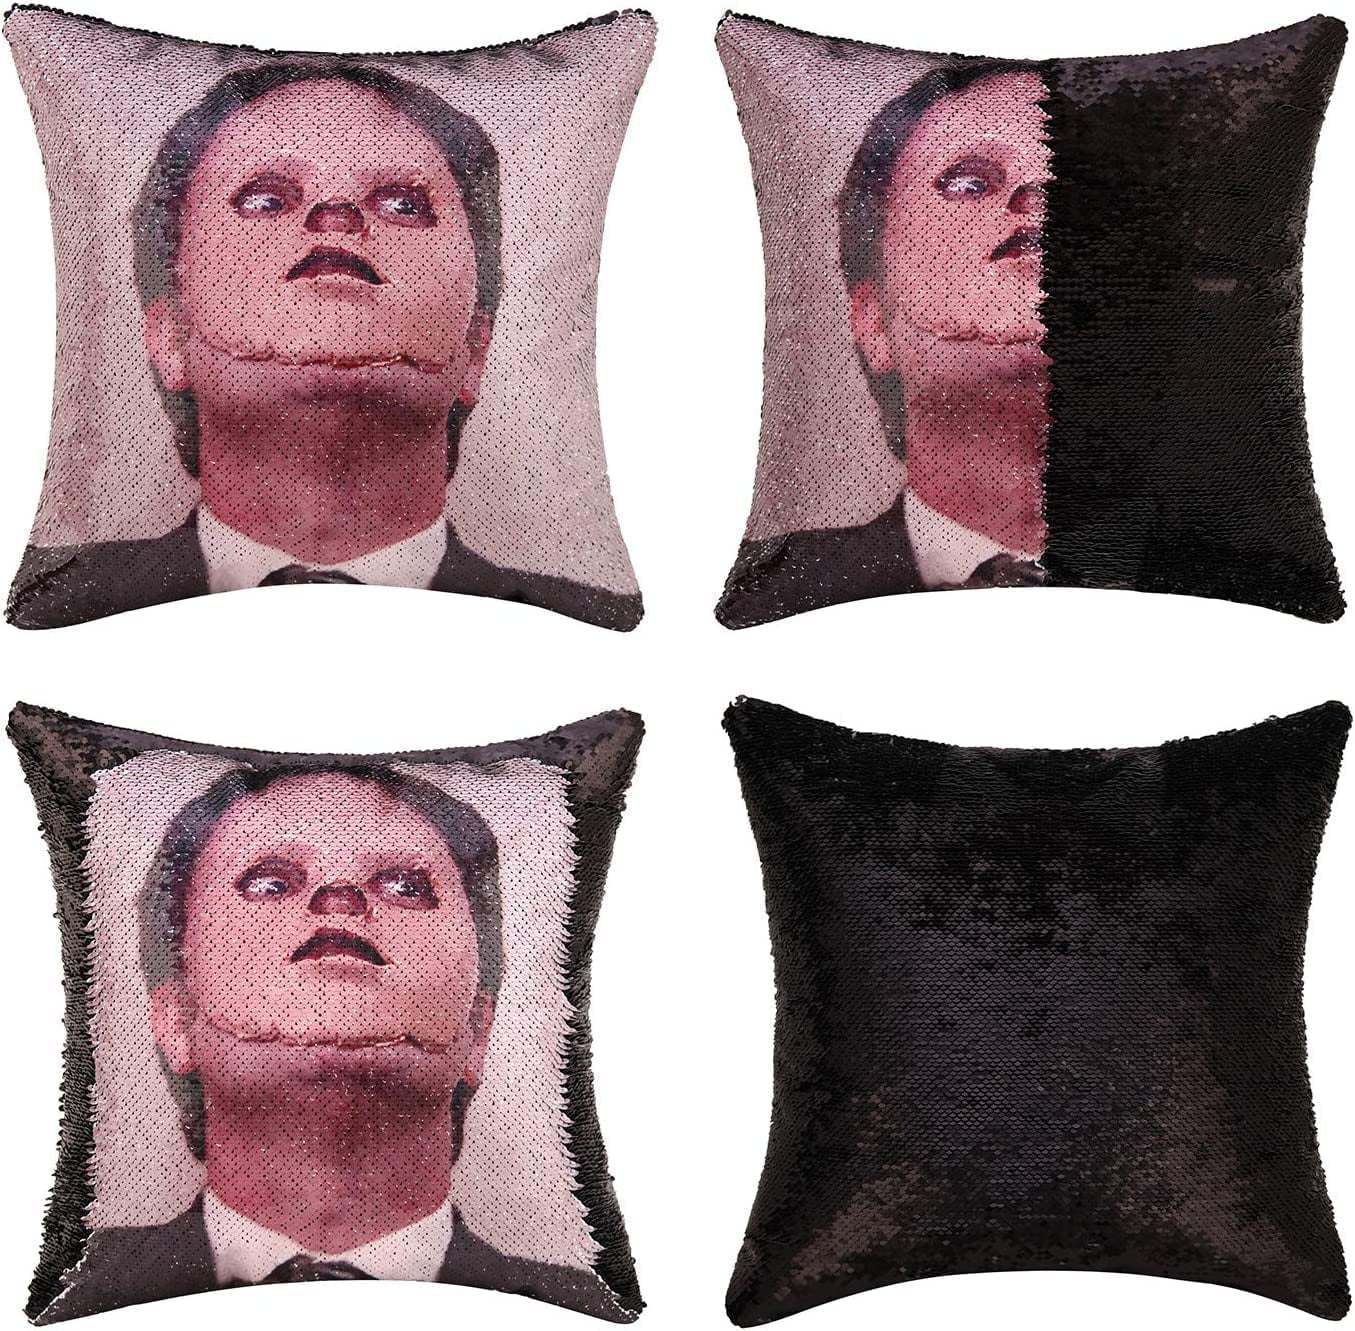  Jiamos The Office Merch Sequin Pillow Cover Dwight Schrute Mask  Throw Pillow Covers Mermaid Decorative Cushion Cover Funny Gag Gifts 16 X  16 Inch, No Filler(Black) : Home & Kitchen